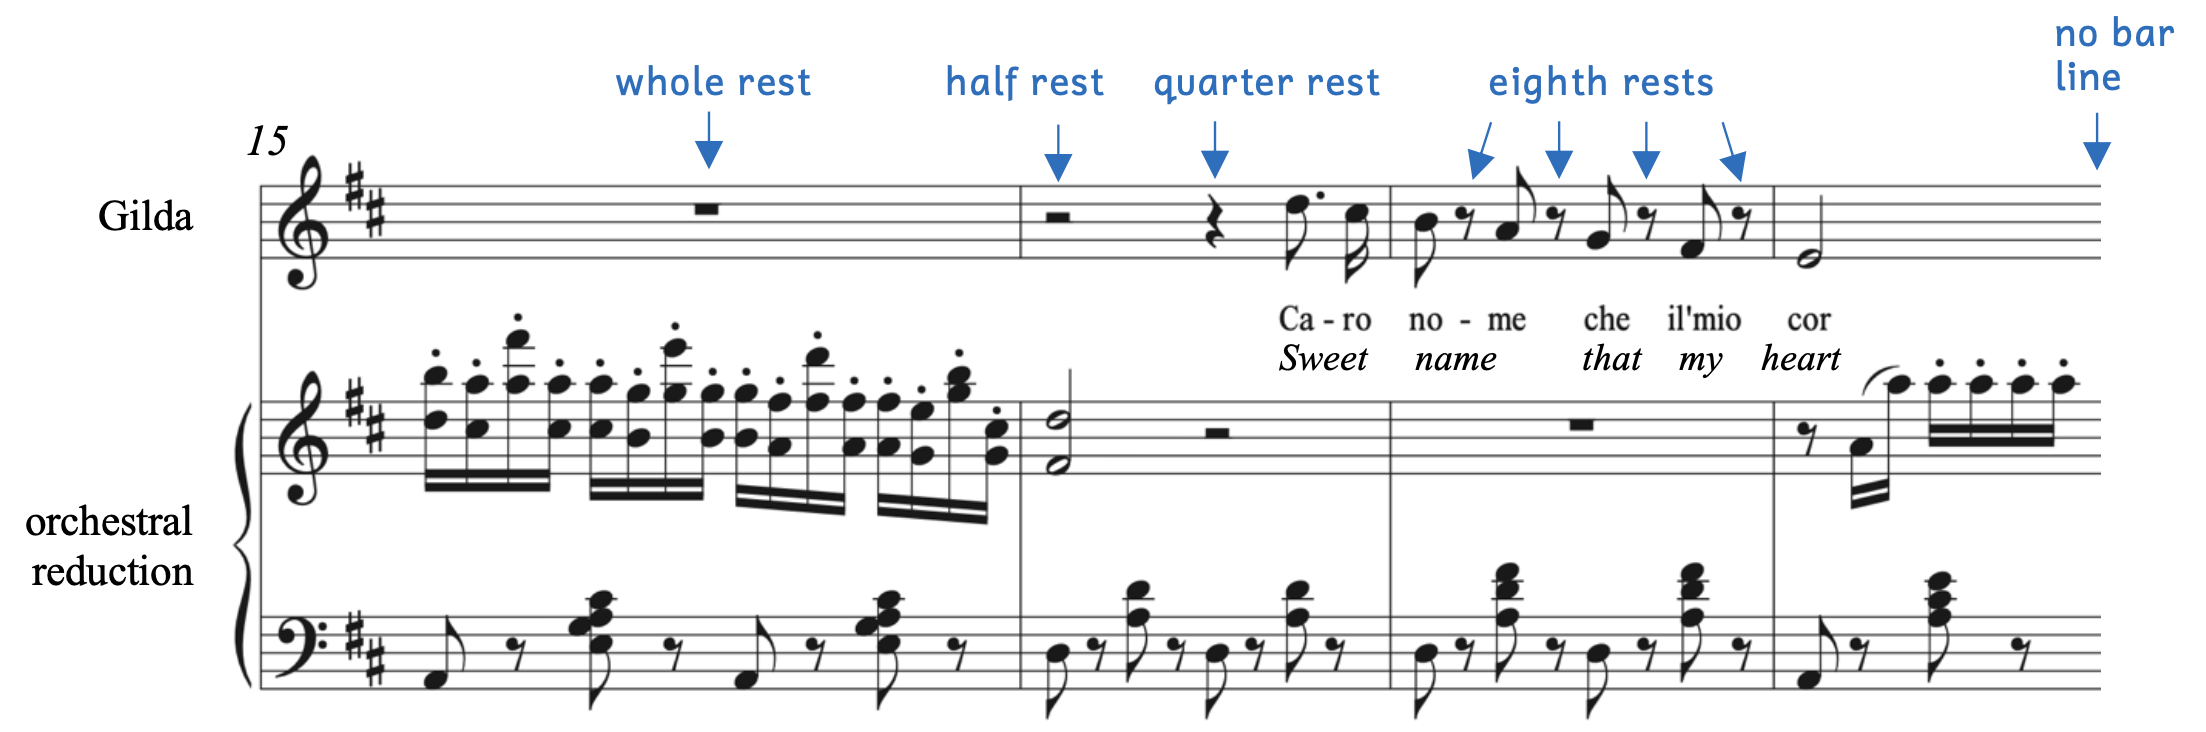 Terms we have learned are shown in Verdi's "Caro nome." The singer's part begins with a whole rest, half rest, and quarter rest. Later eighth rests alternate with eighth notes. There is no bar line at the end of this example because the example does not end at the end of a measure.